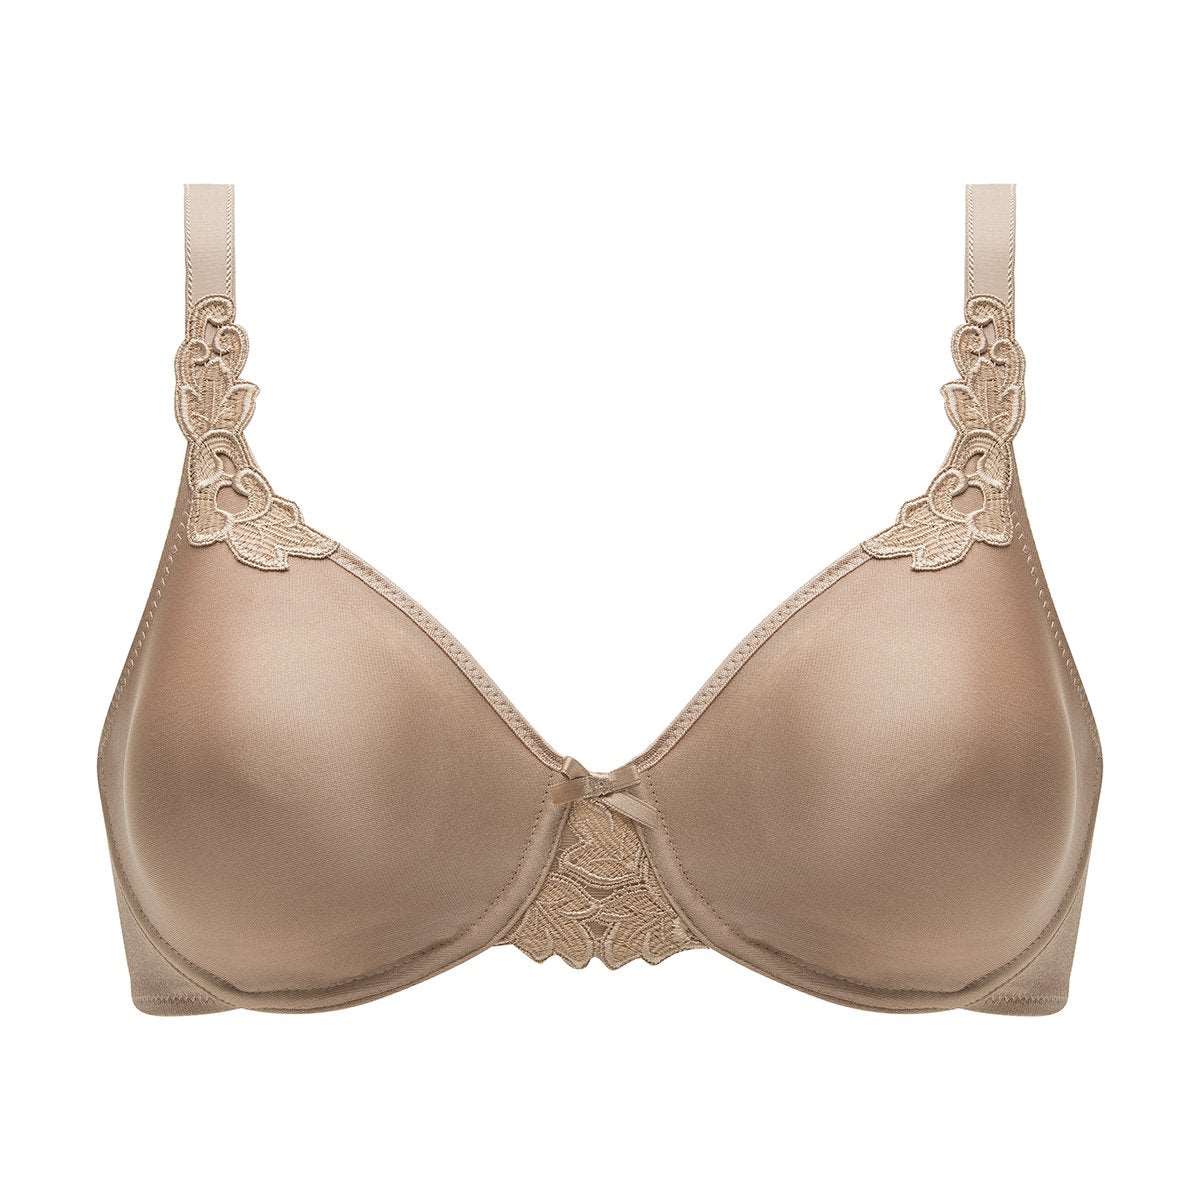 Parts of a Bra – Shani's Lingerie Torrevieja Costa Blanca Spain